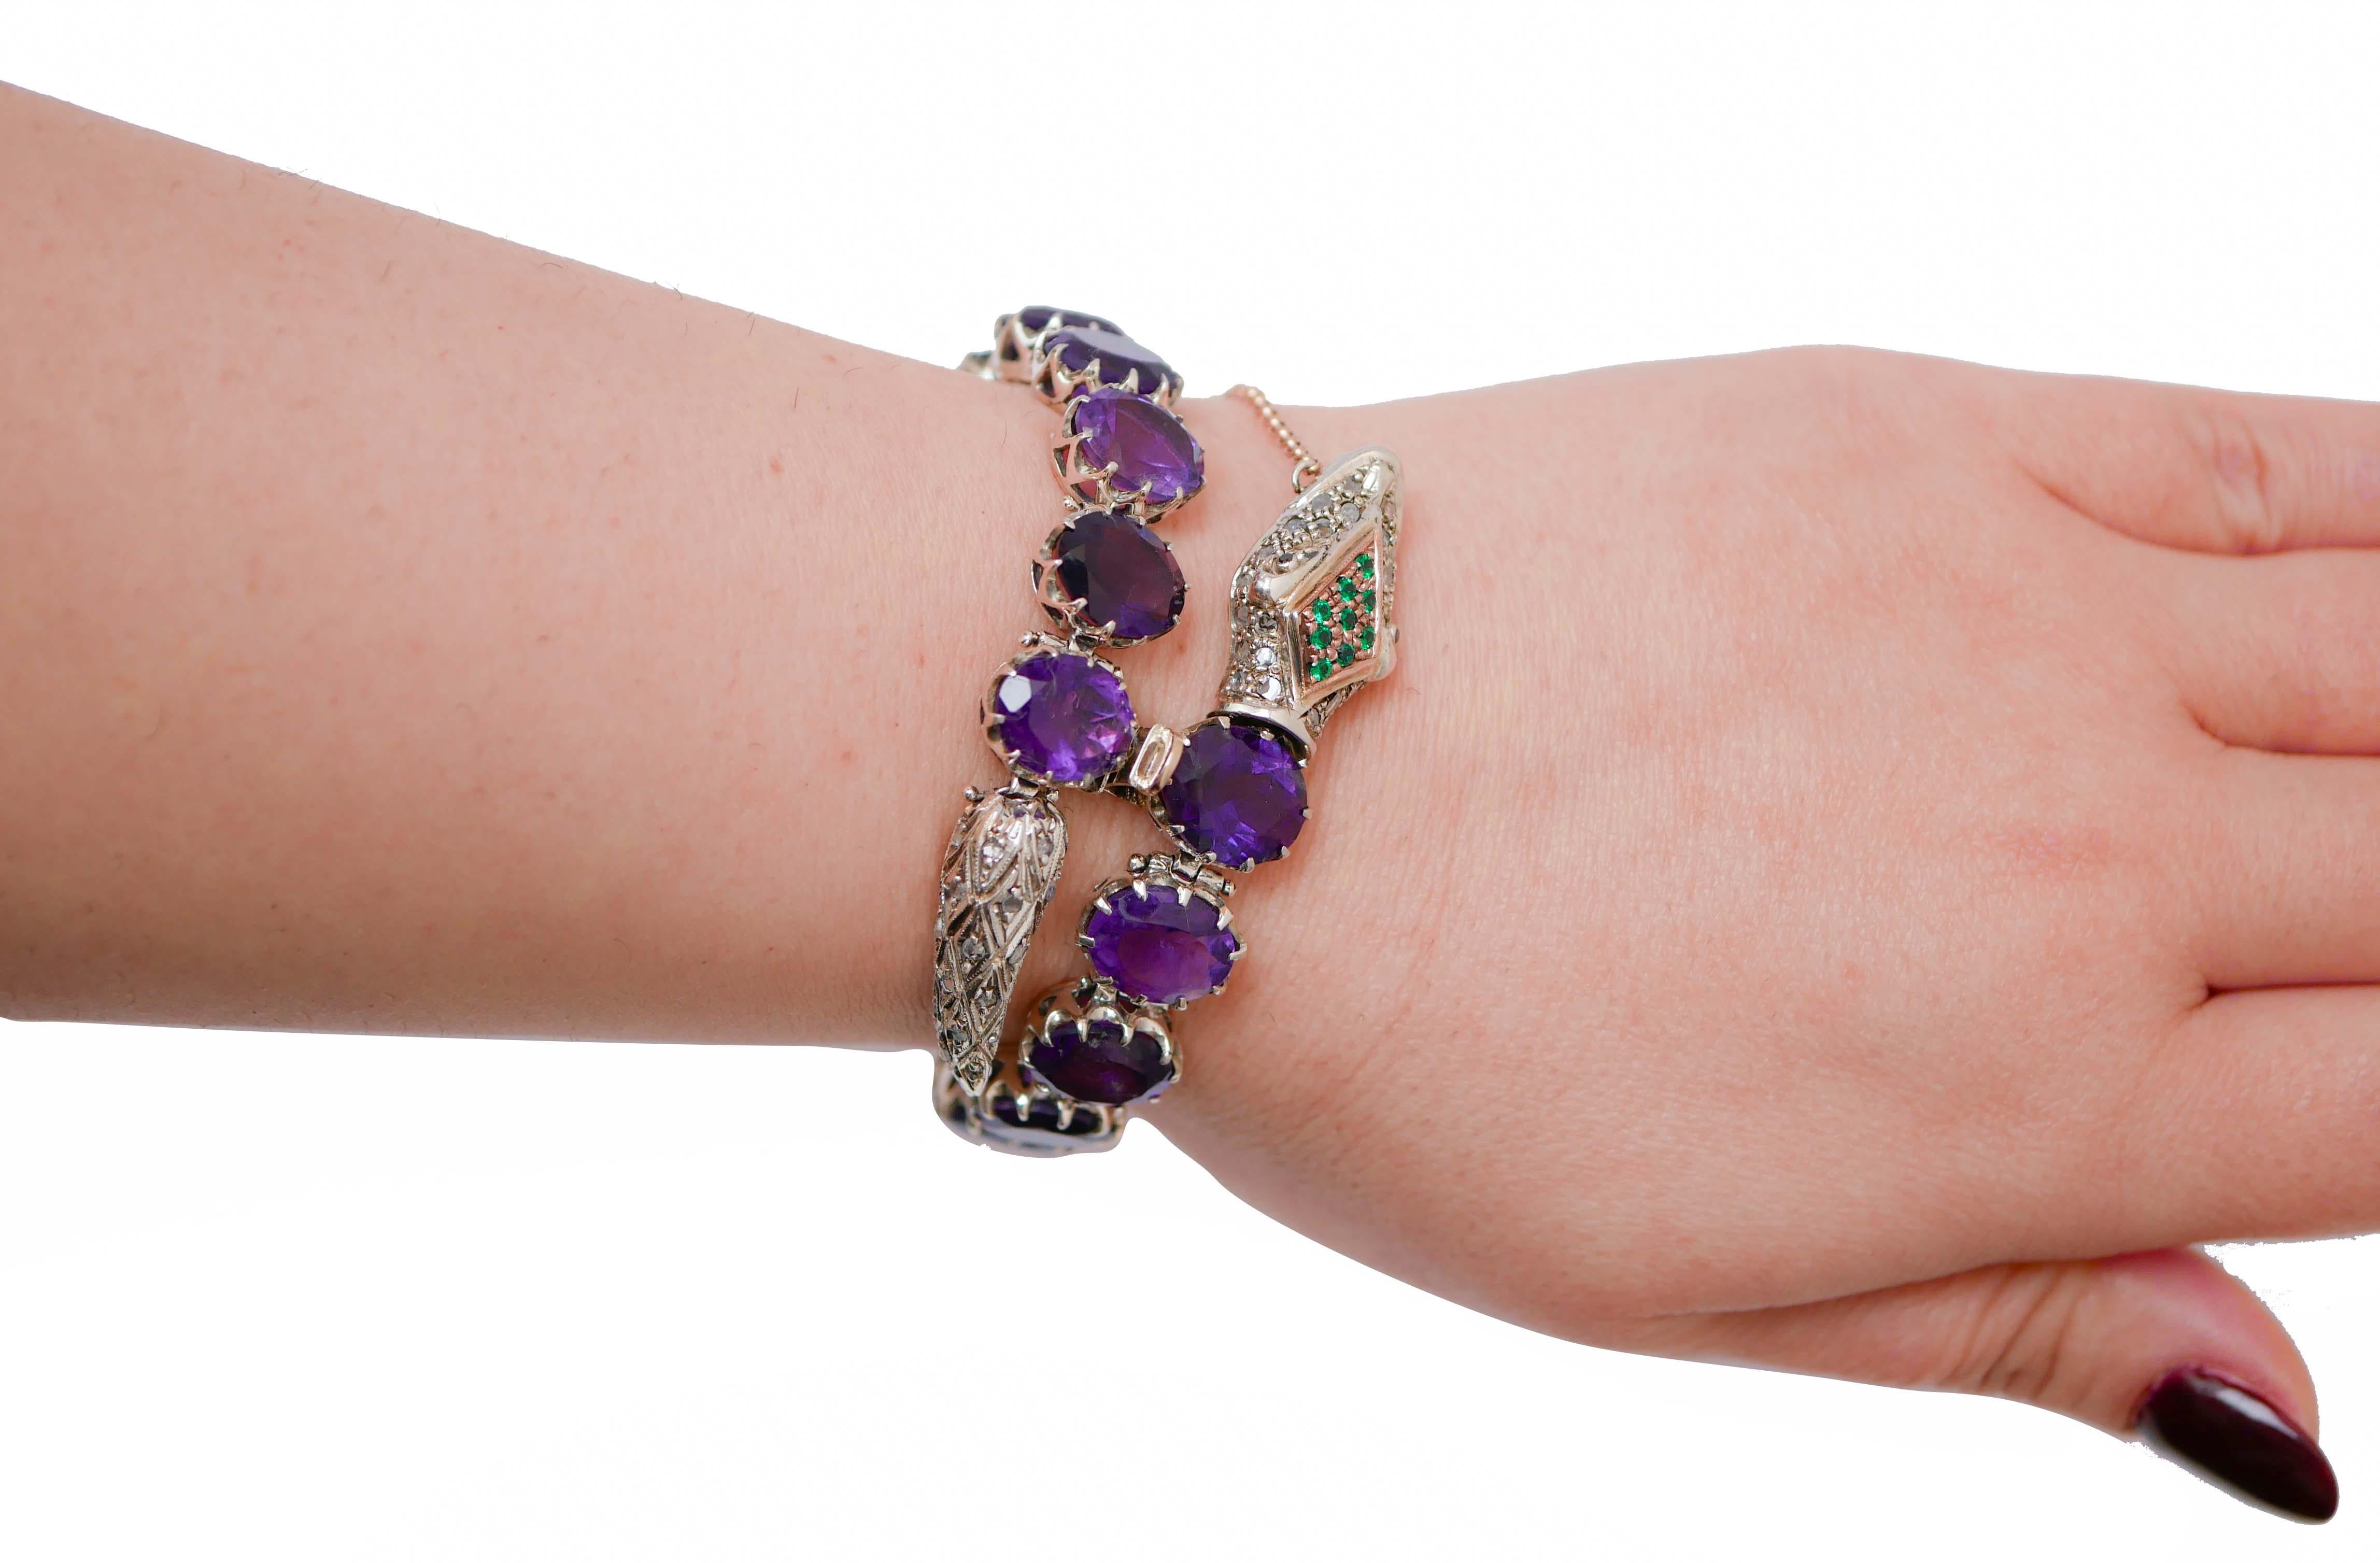 Mixed Cut Hydrothermal Spinel, Amethysts, Diamonds, Rose Gold and Silver Snake Bracelet. For Sale